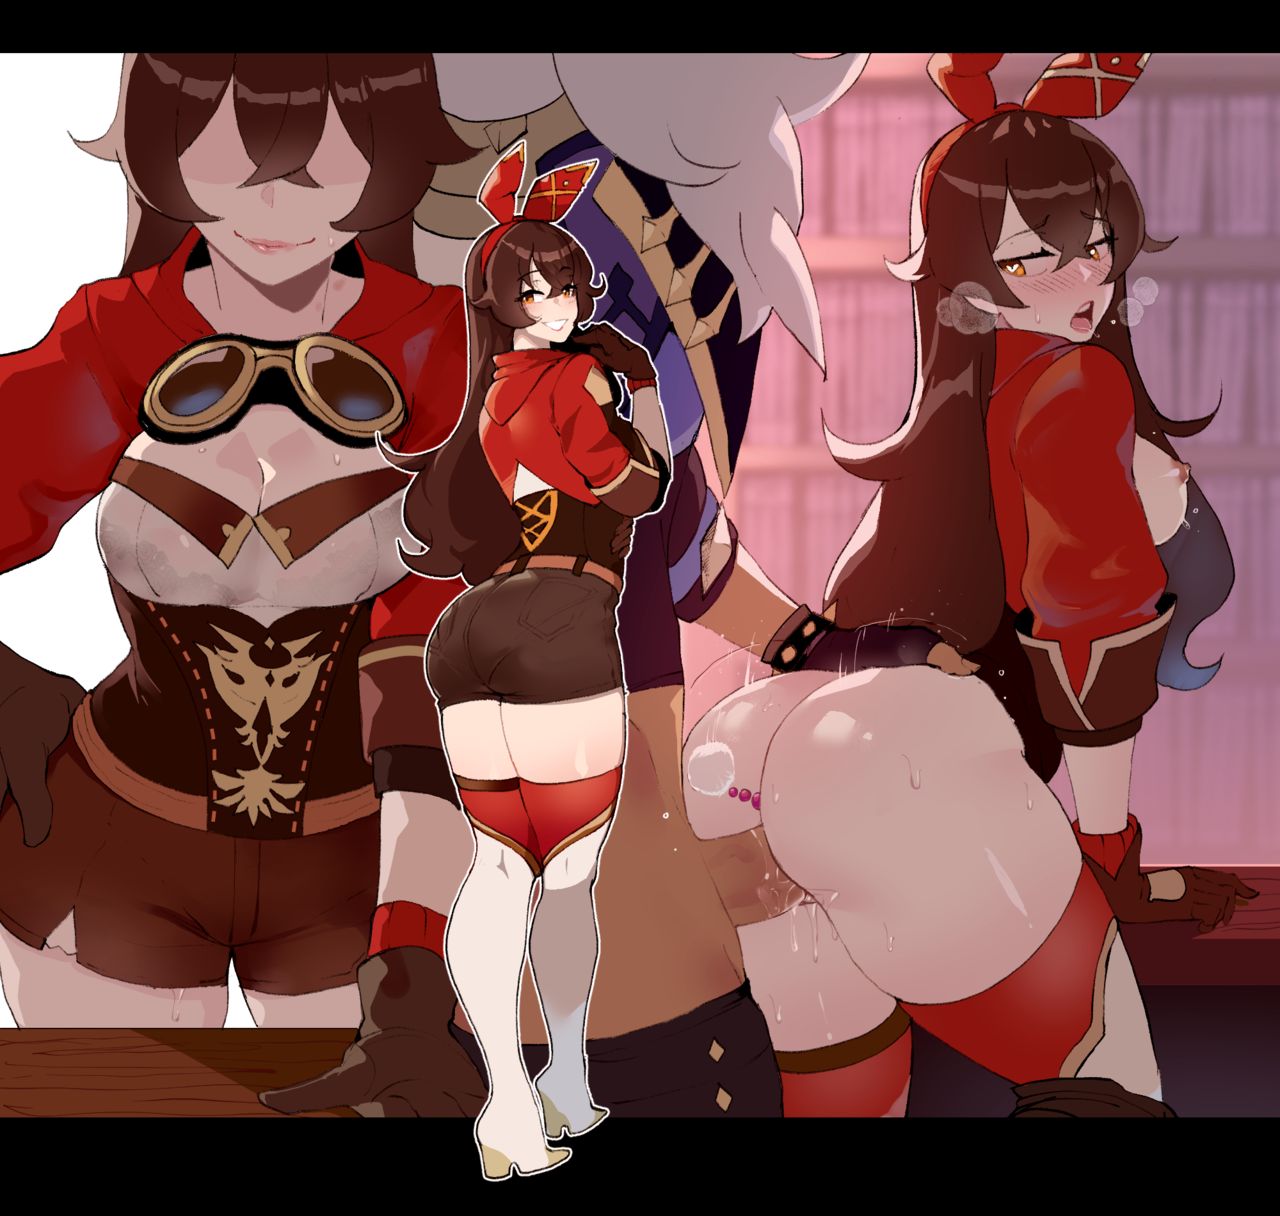 [ThiccWithaQ] Amber & Kaeya (Chinese) 【ThiccWithaQ】安柏X凯亚